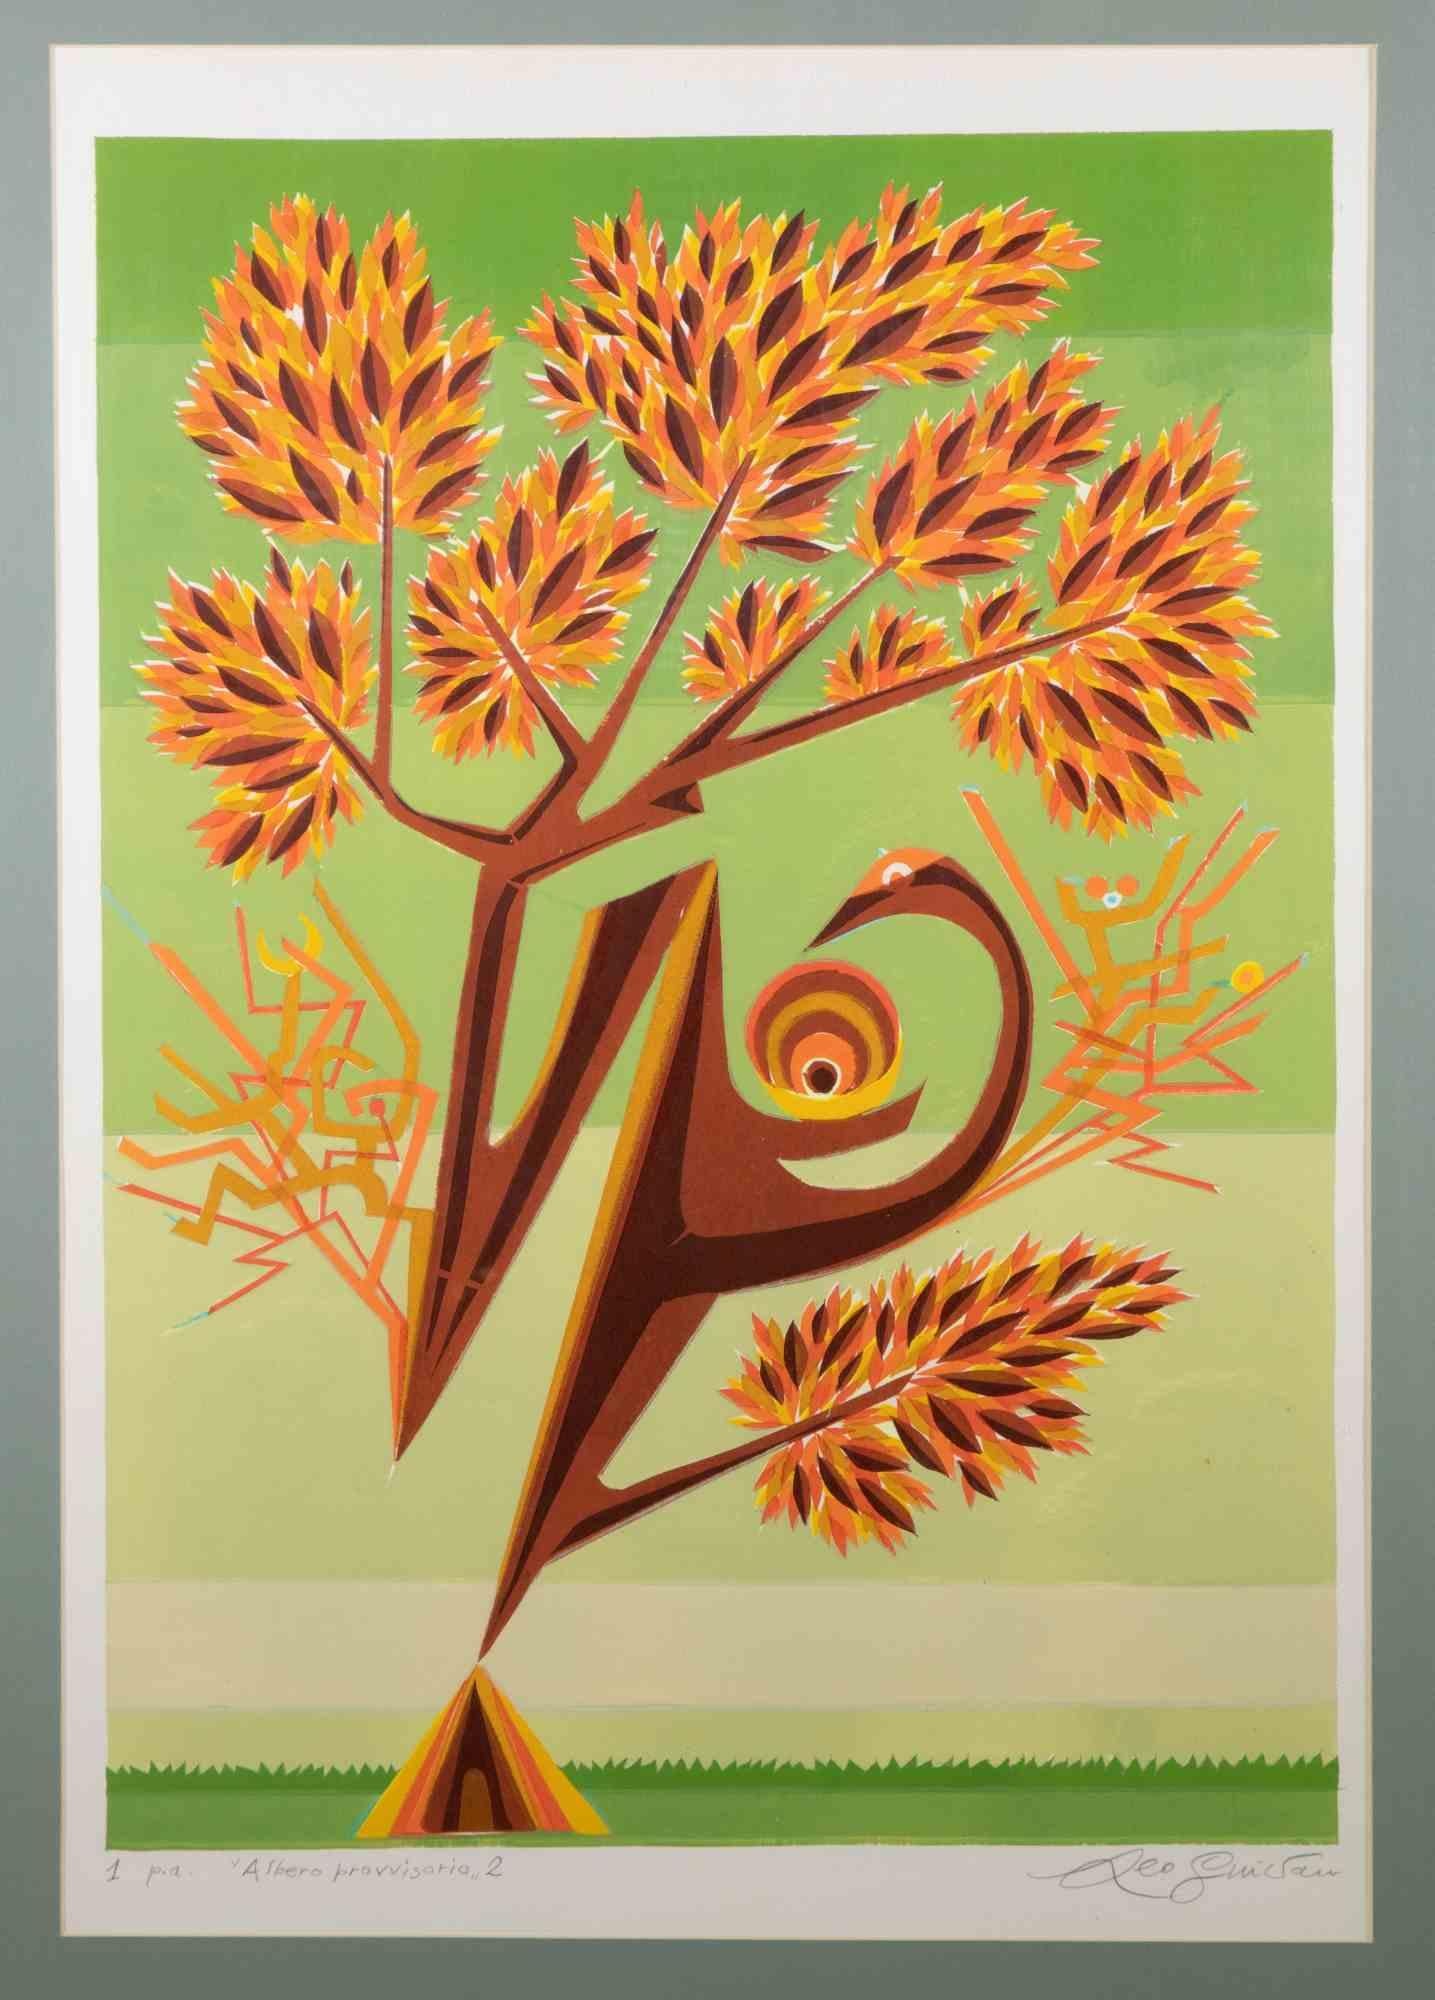  Temporary Tree 2 is a contemporary artwork realized by Leo Guida in 1970s.

Mixed colored lithograph.

Hand signed and numbered on the lower margin.

Artist's proof.

Original title: Albero provvisorio 2

Leo Guida  (1992 - 2017). Sensitive to